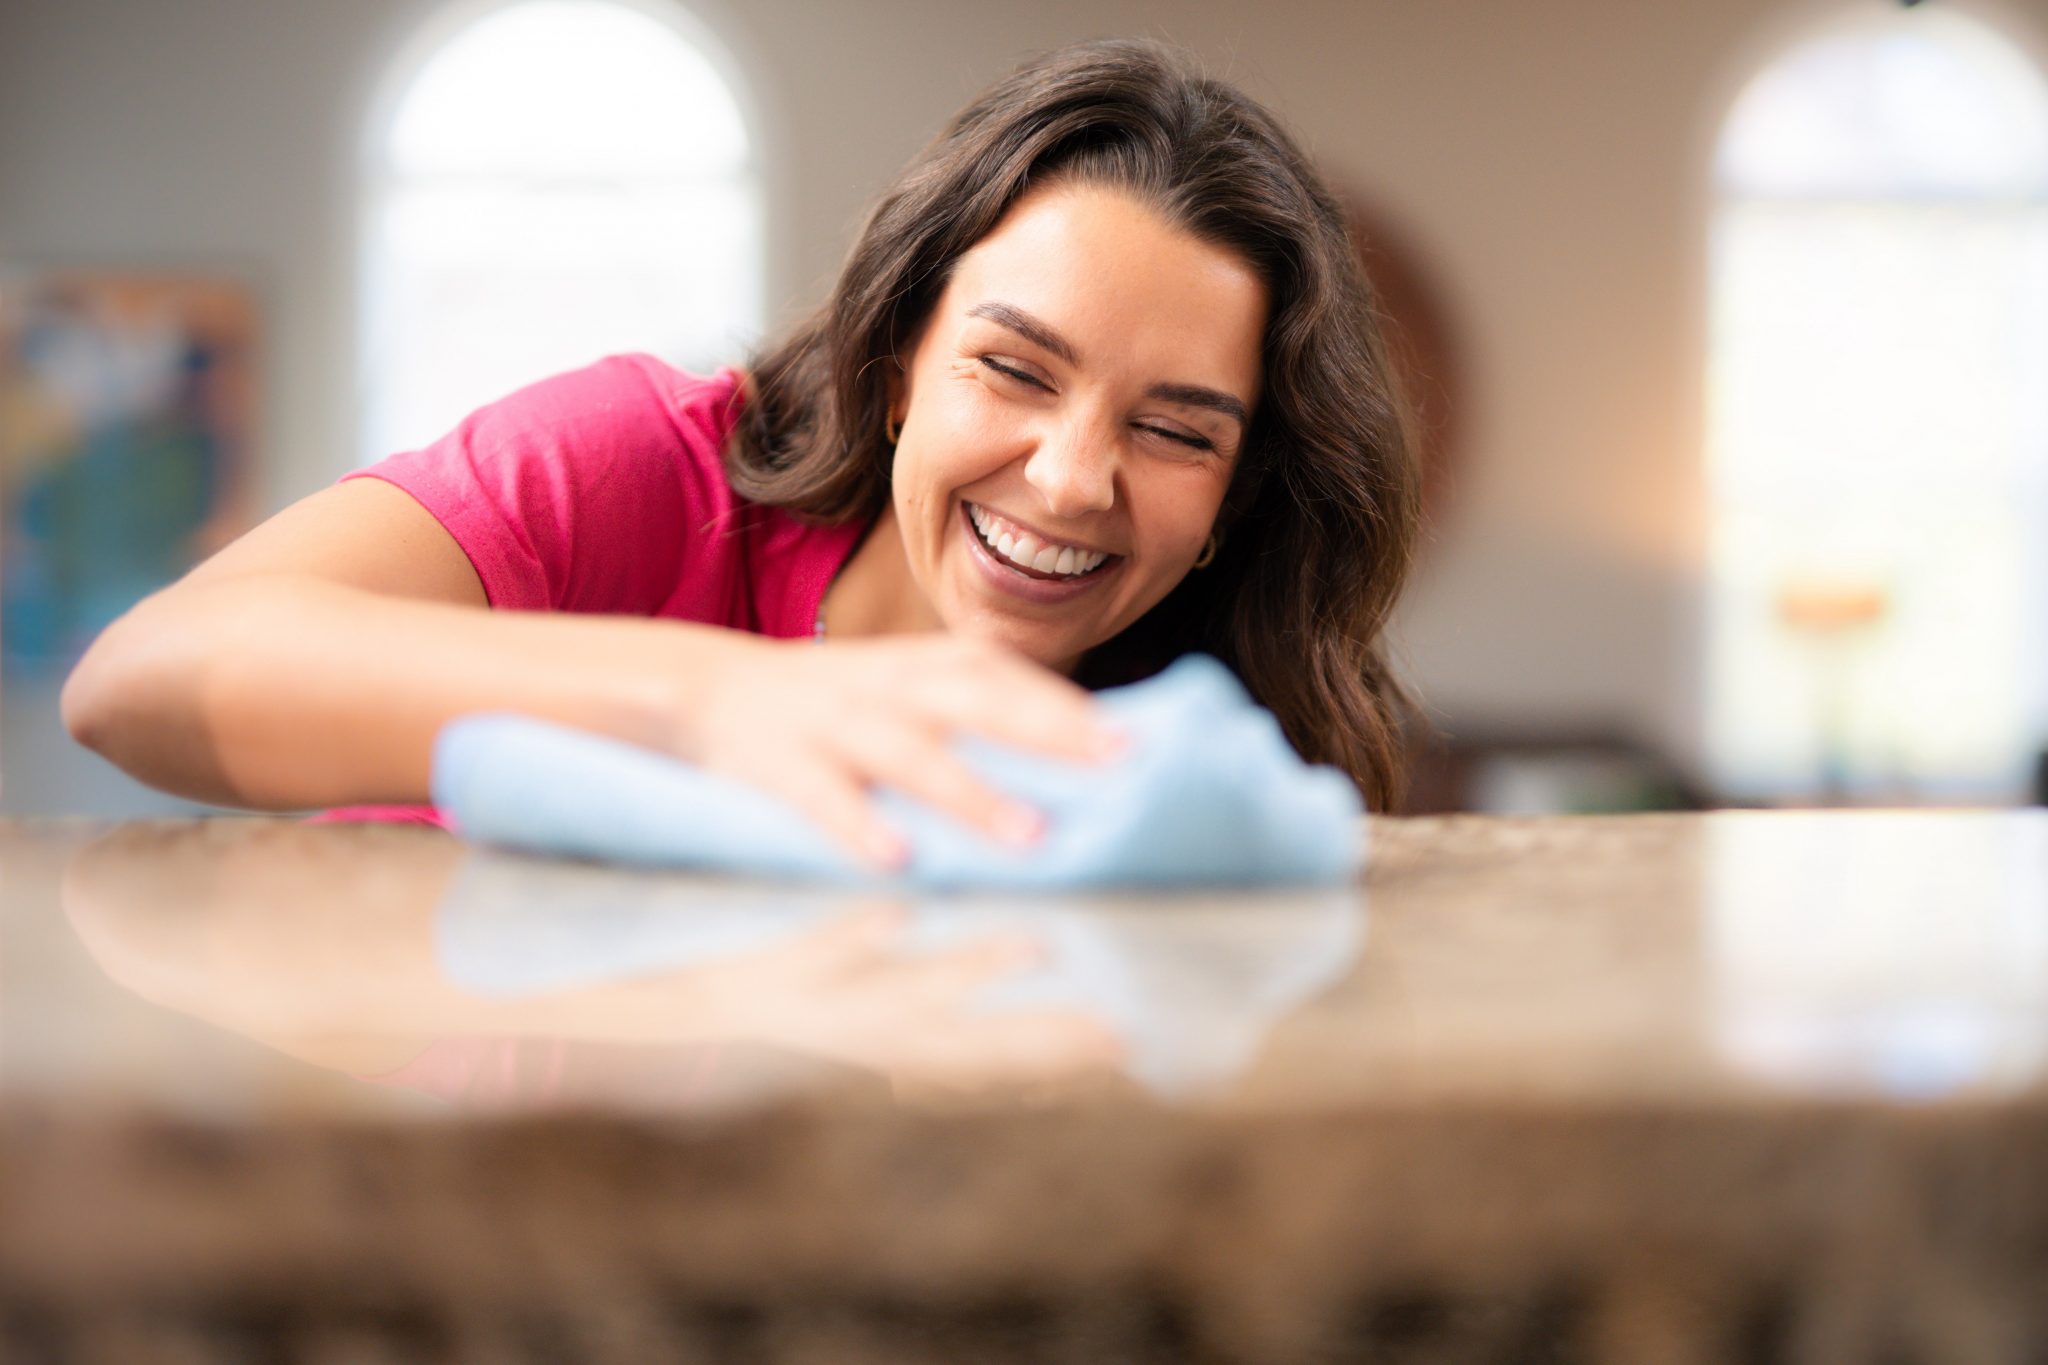 better life maids cleaning in chesterfield, best maids in chesterfield, cleaning companies near chesterfield, cleaning company near me, amazing maids, best maids in chesterfield, best cleaning service in chesterfield mo